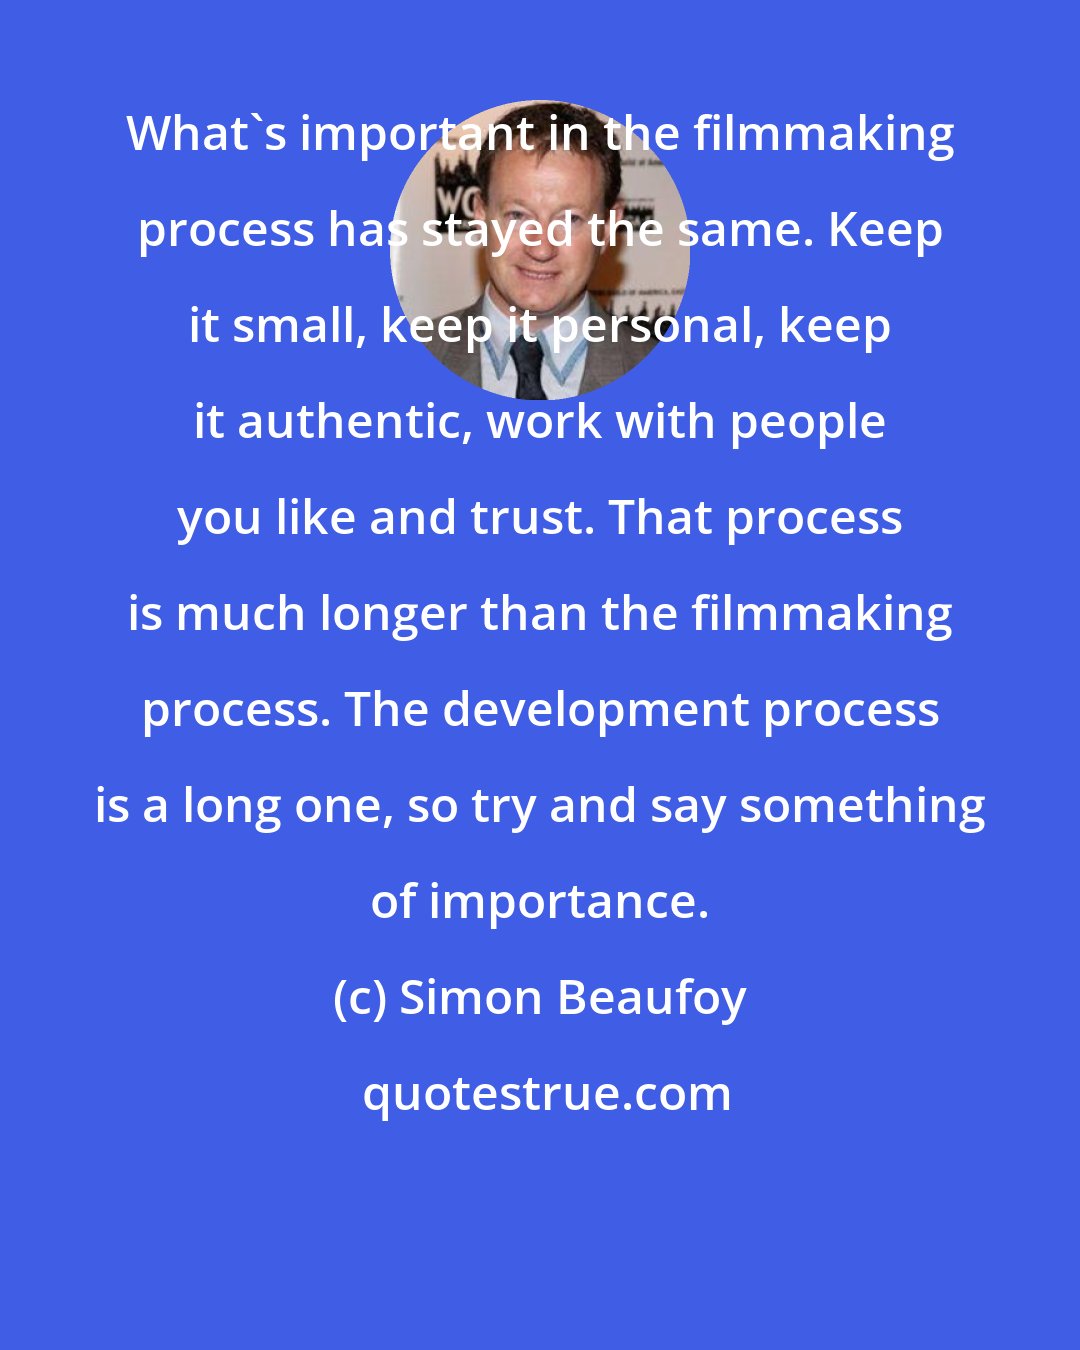 Simon Beaufoy: What's important in the filmmaking process has stayed the same. Keep it small, keep it personal, keep it authentic, work with people you like and trust. That process is much longer than the filmmaking process. The development process is a long one, so try and say something of importance.